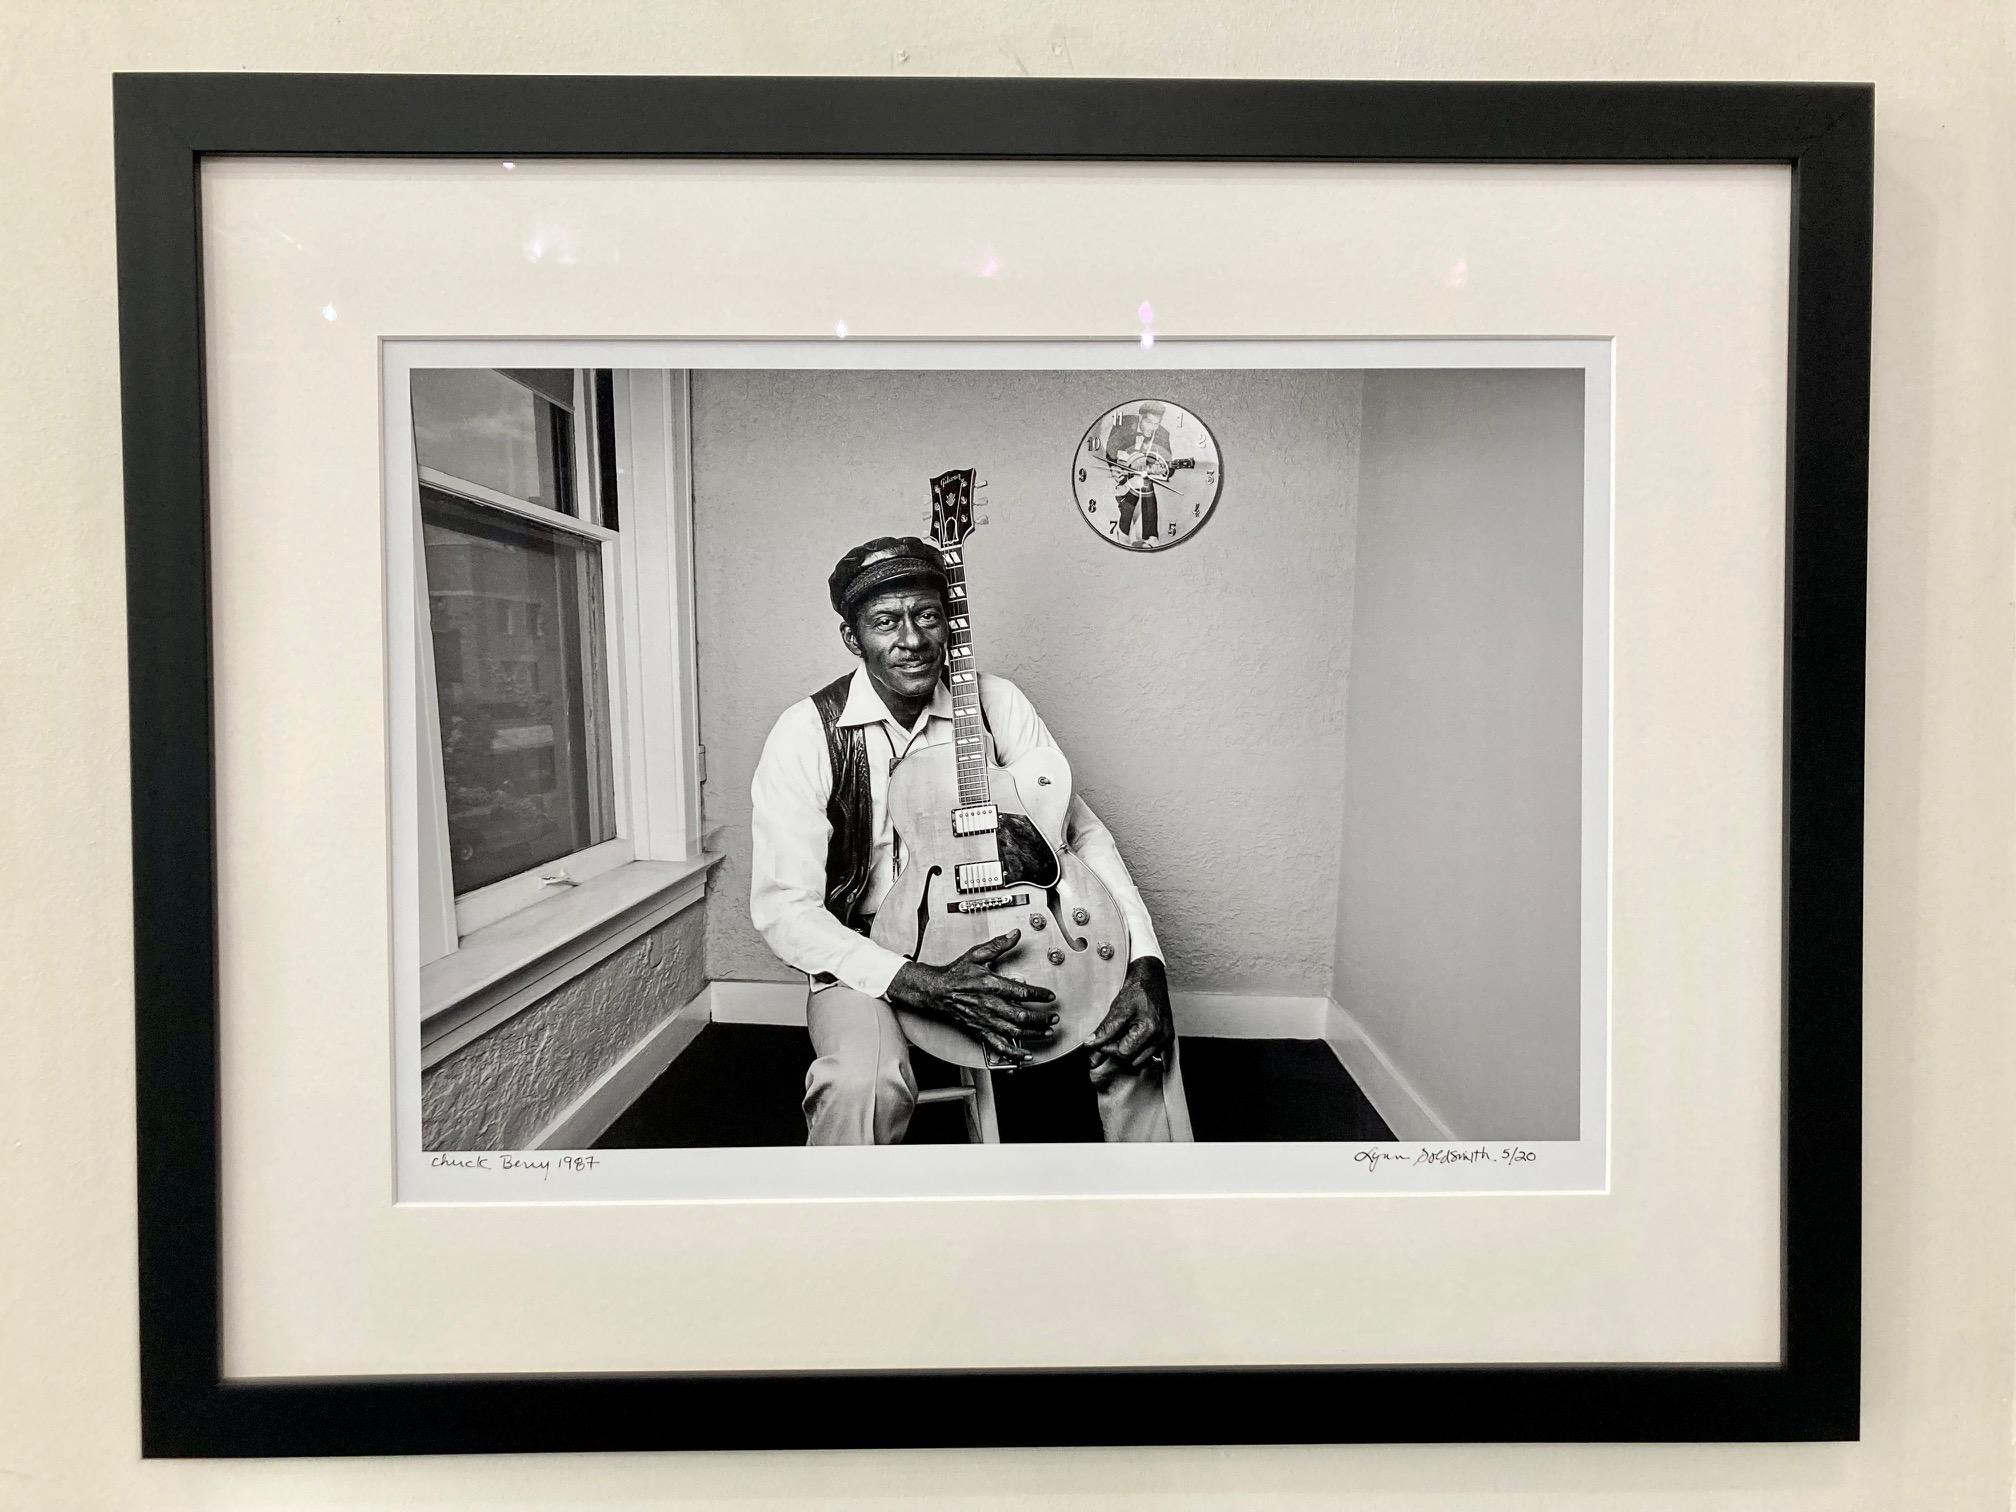 Chuck Berry by acclaimed photographer. Lynn Goldsmith, taken in 1987

Framed, signed limited edition 16x20" print, edition #5/20 

Frame measures 28” high x 22.5” across x 1” thick

Custom framed with complimentary black frame and non-glare museum